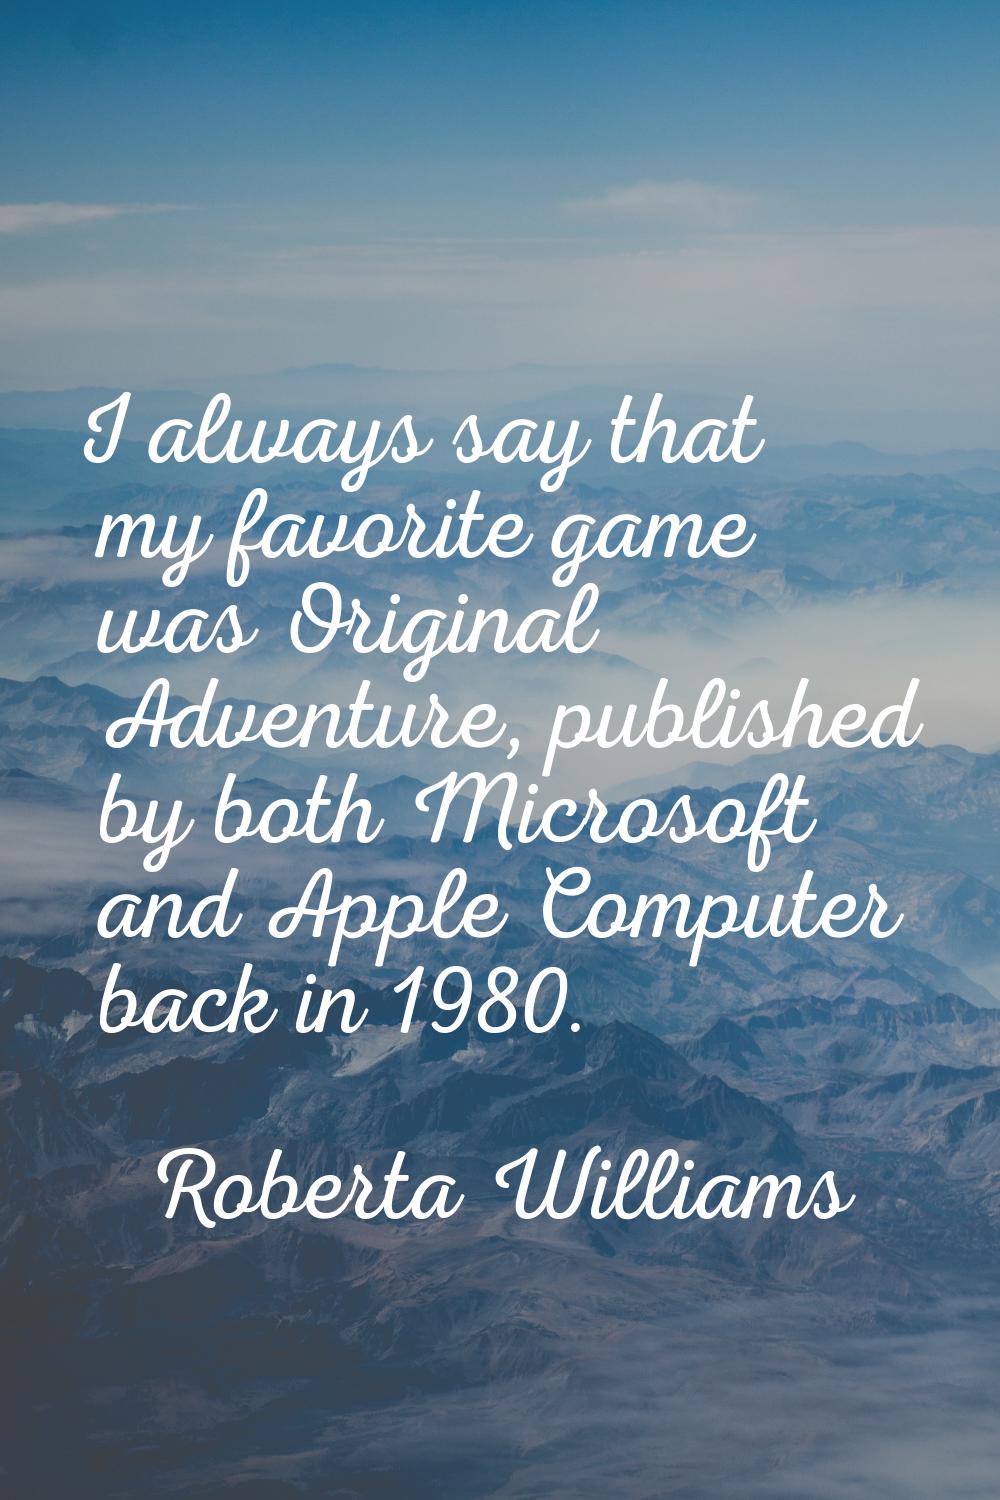 I always say that my favorite game was Original Adventure, published by both Microsoft and Apple Co